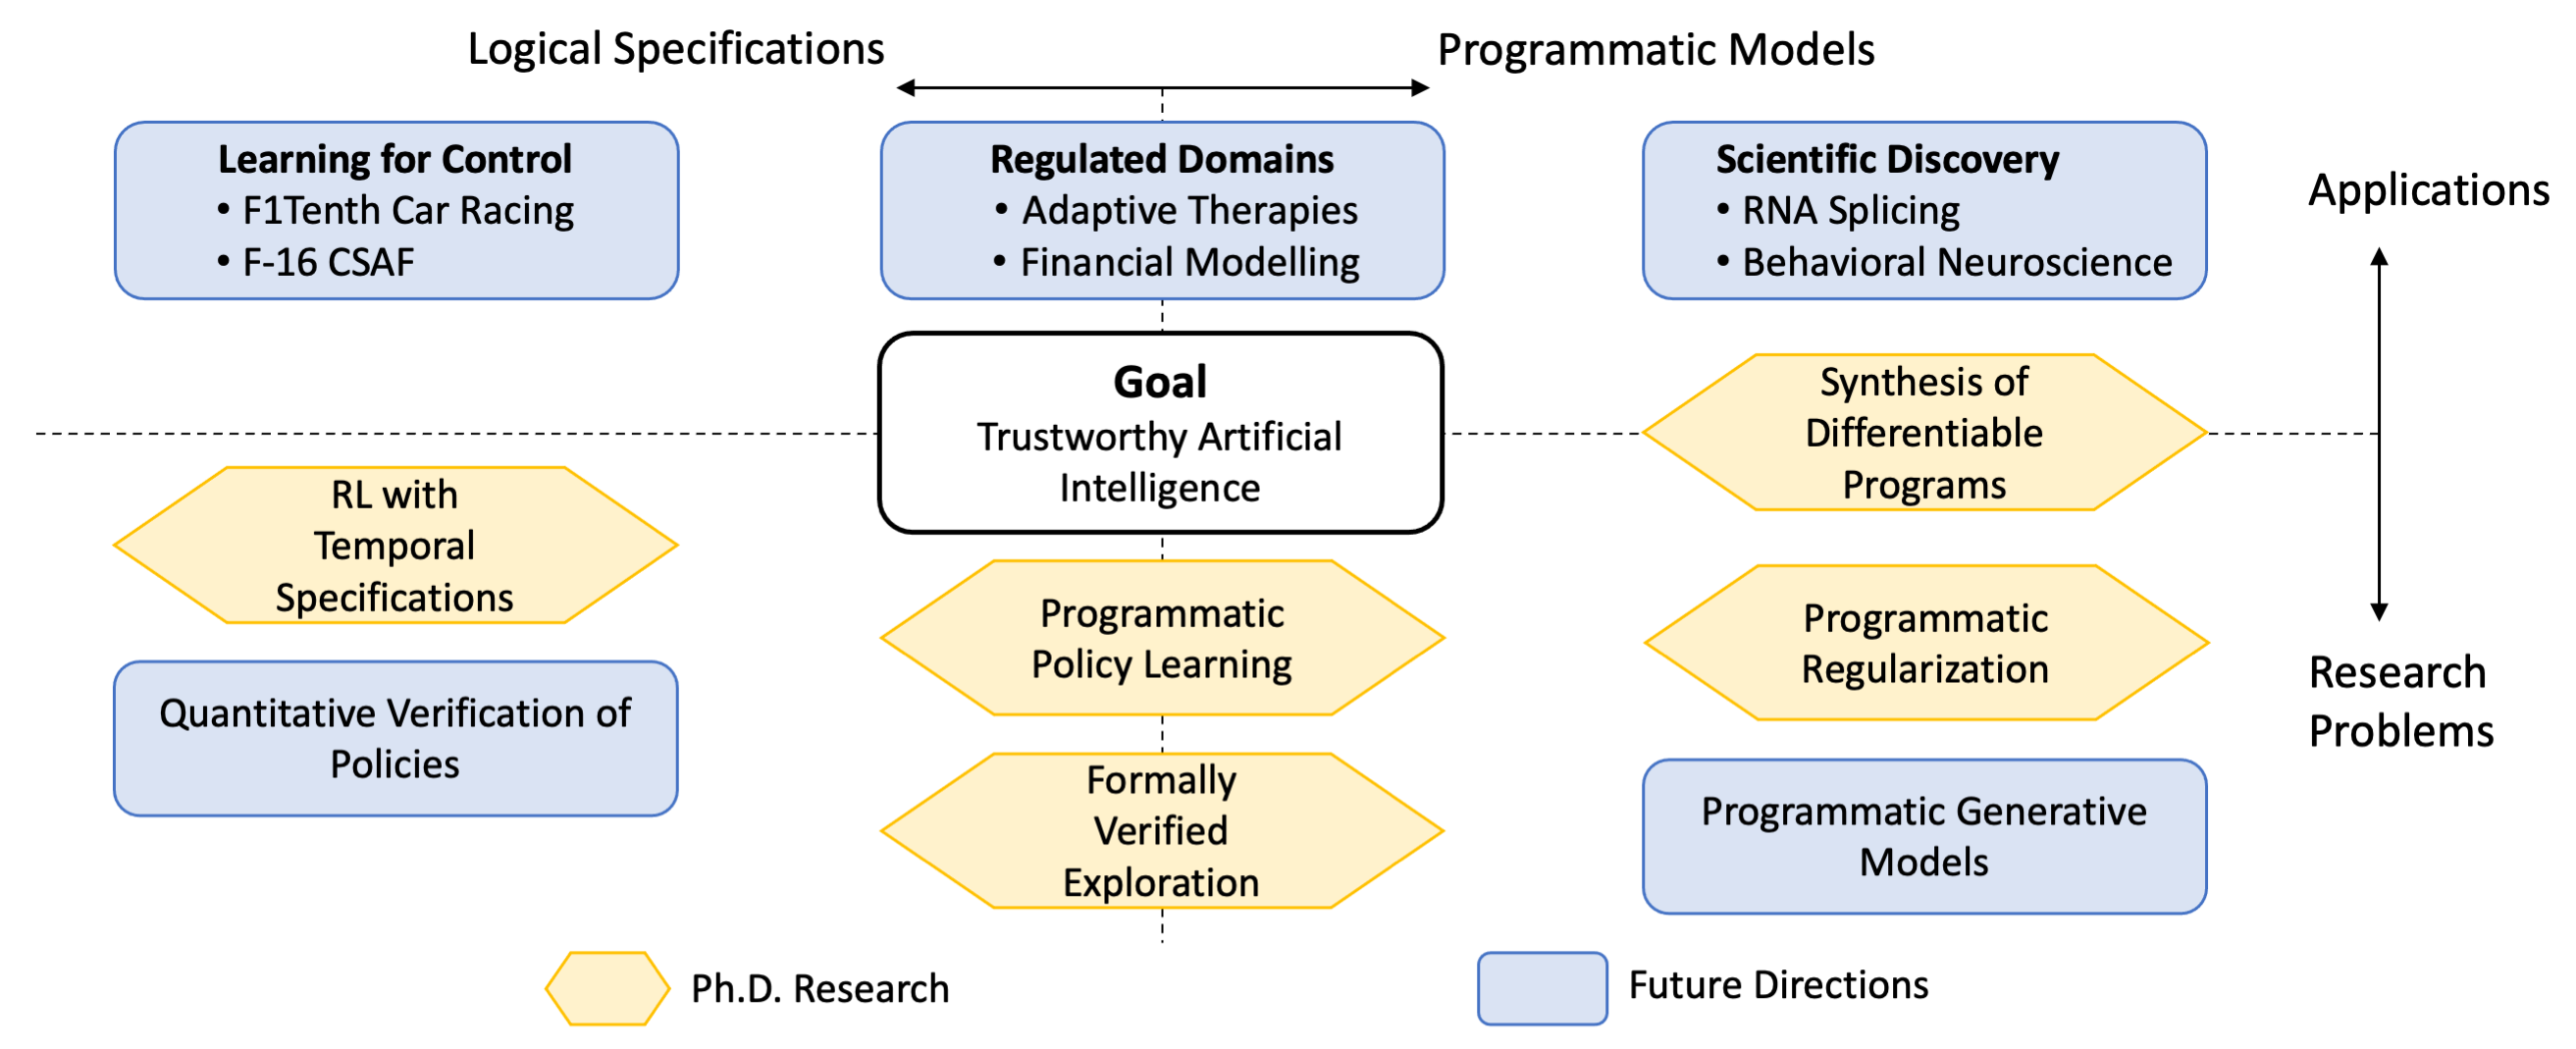 Overview of my research around the theme of Trustworthy AI. Topics on the left and right leverage logical specifications and programmatic models, respectively. Foundational research problems are towards the bottom, and applications are towards the top.